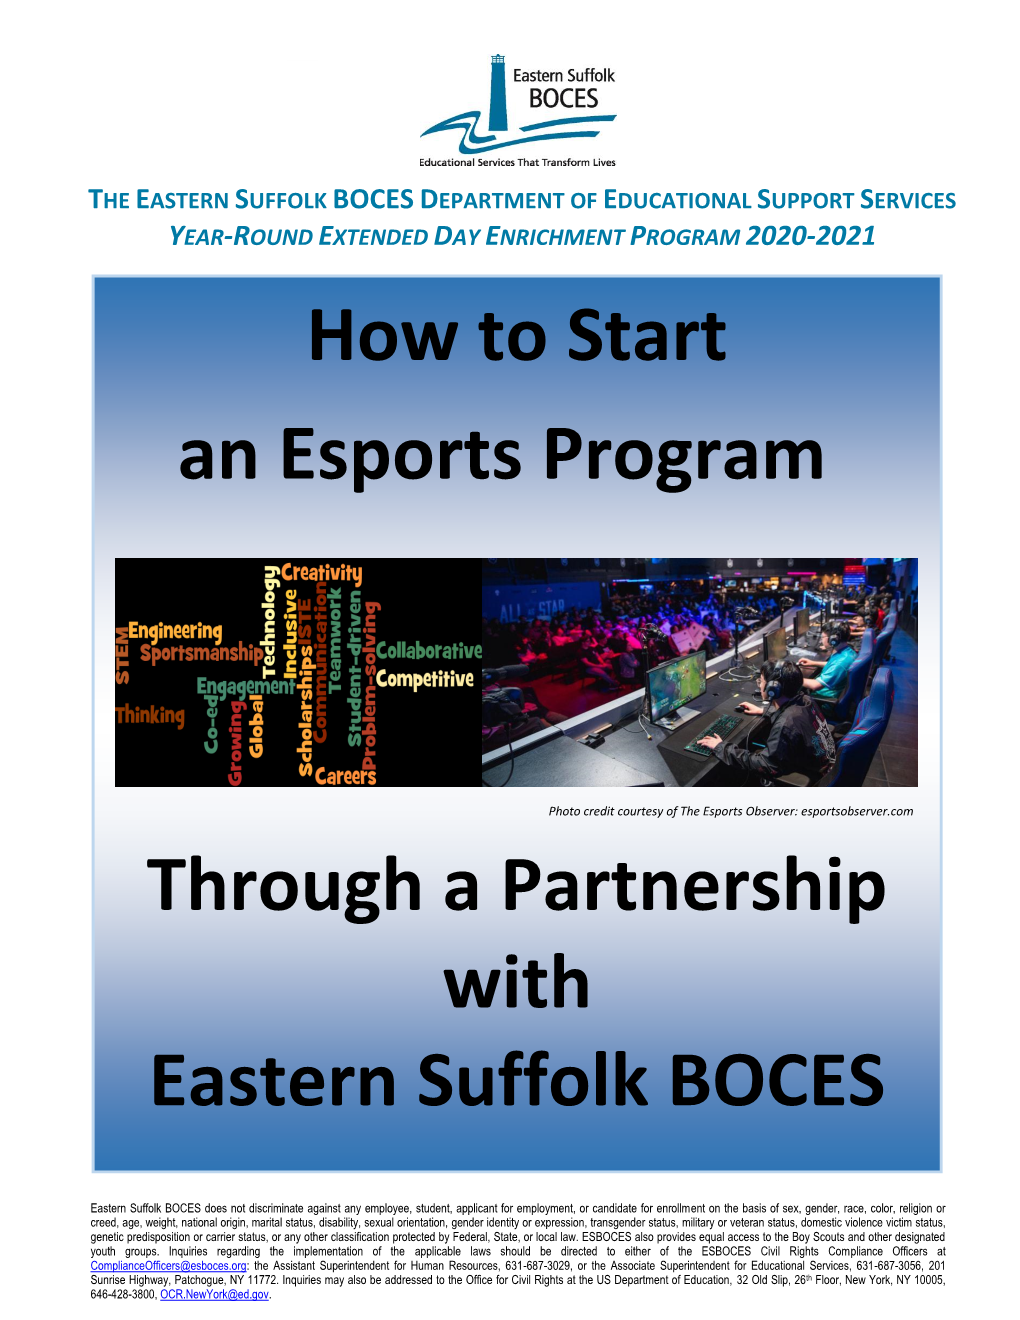 How to Start an Esports Program Through a Partnership with Eastern